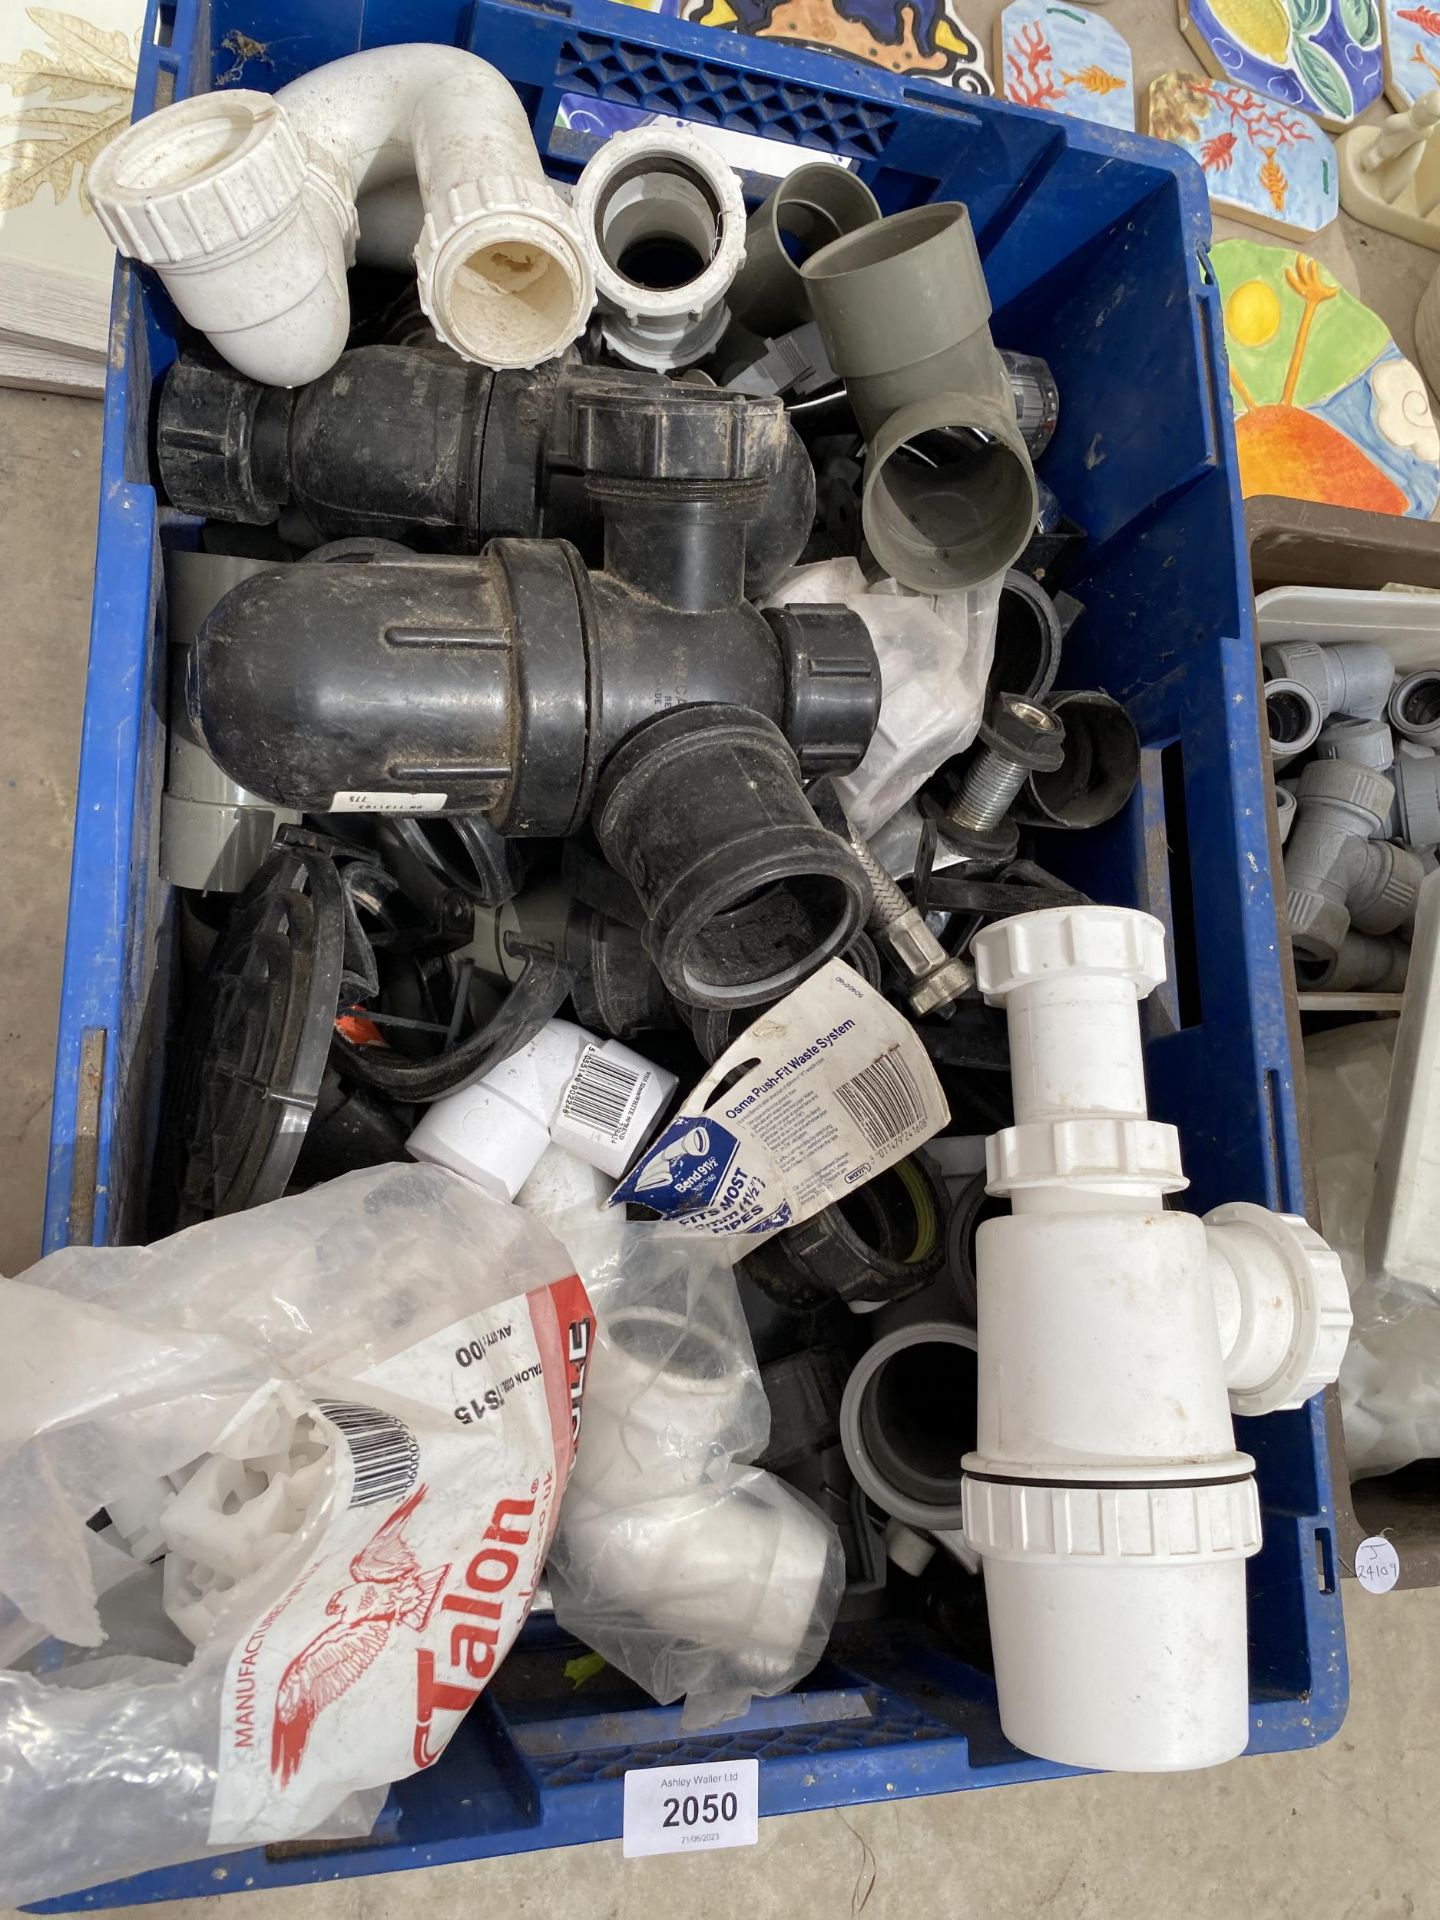 A LARGE ASSORTMENT OF PLASTIC PLUMBING FITTINGS - Image 2 of 3